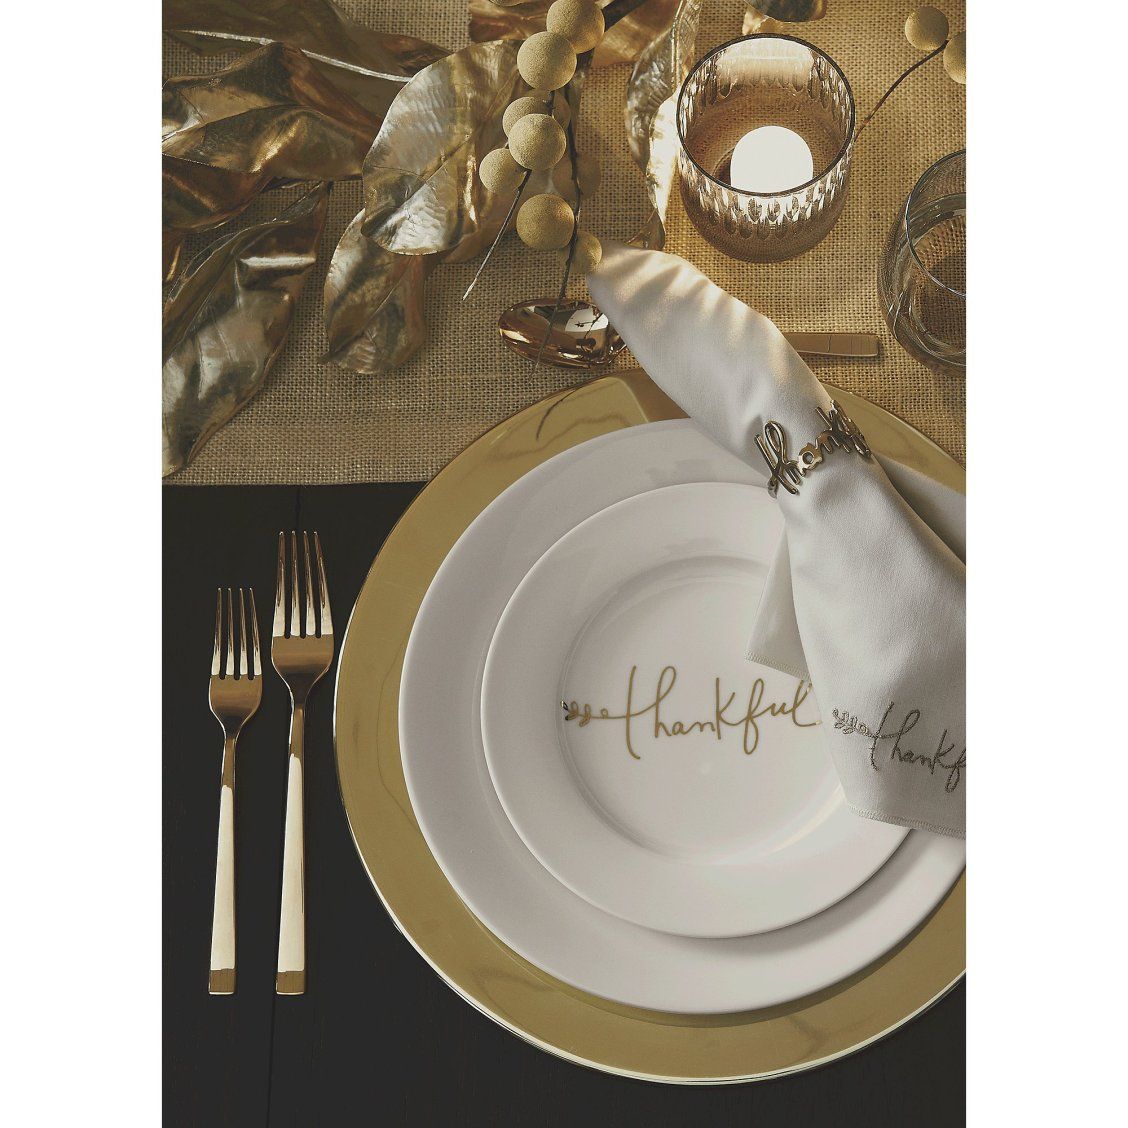 graceful message thankful gratitude artist kelly ventura artistic accents tablecloth gilds this versatile thanksgiving accent plate gleaming gold metallic handwriting with patio